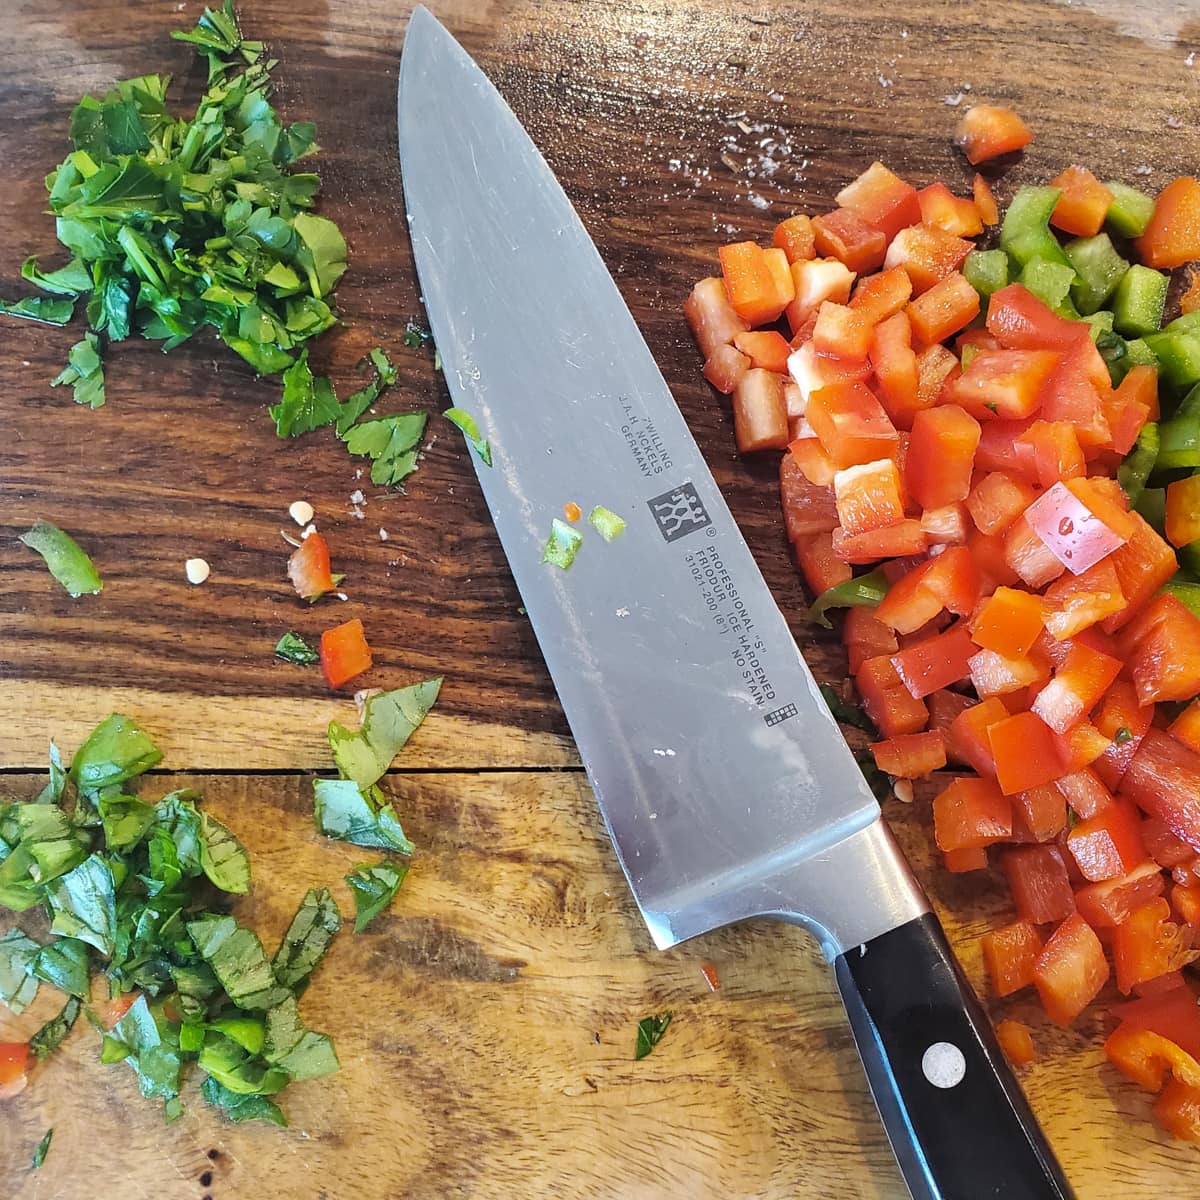 Diced bell peppers with chopped parsley and basil on a wood cutting board with a Chef's knife.